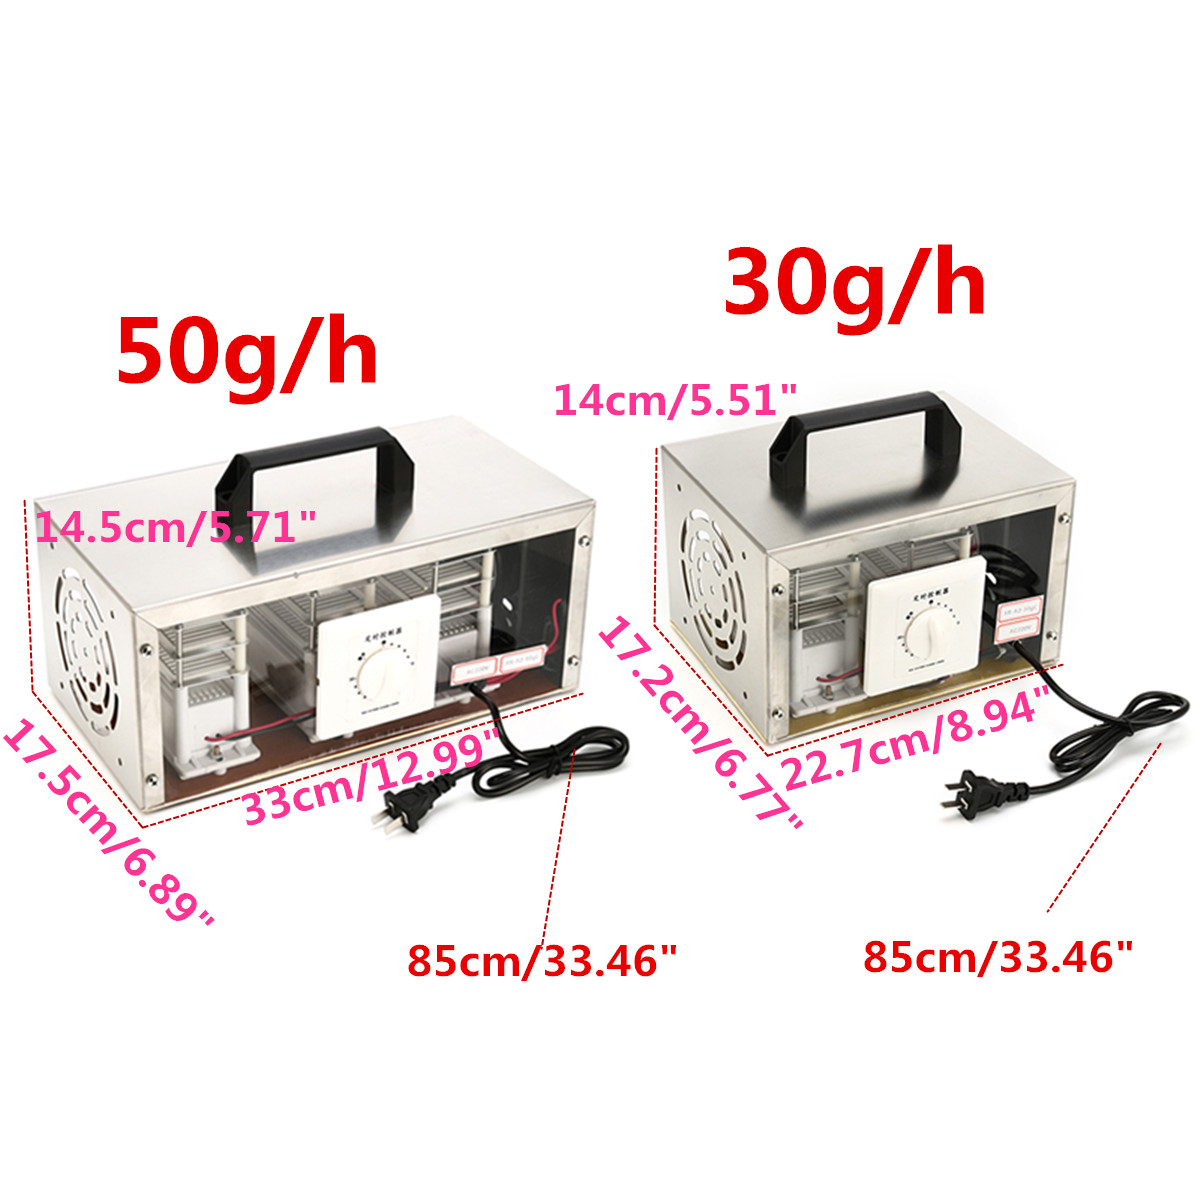 30gh-50gh-220V-Air-Ozone-Generator-Air-Purifier-Sterilizer-With-Timing-Switch-for-Home-Car-Office-Me-1290170-3